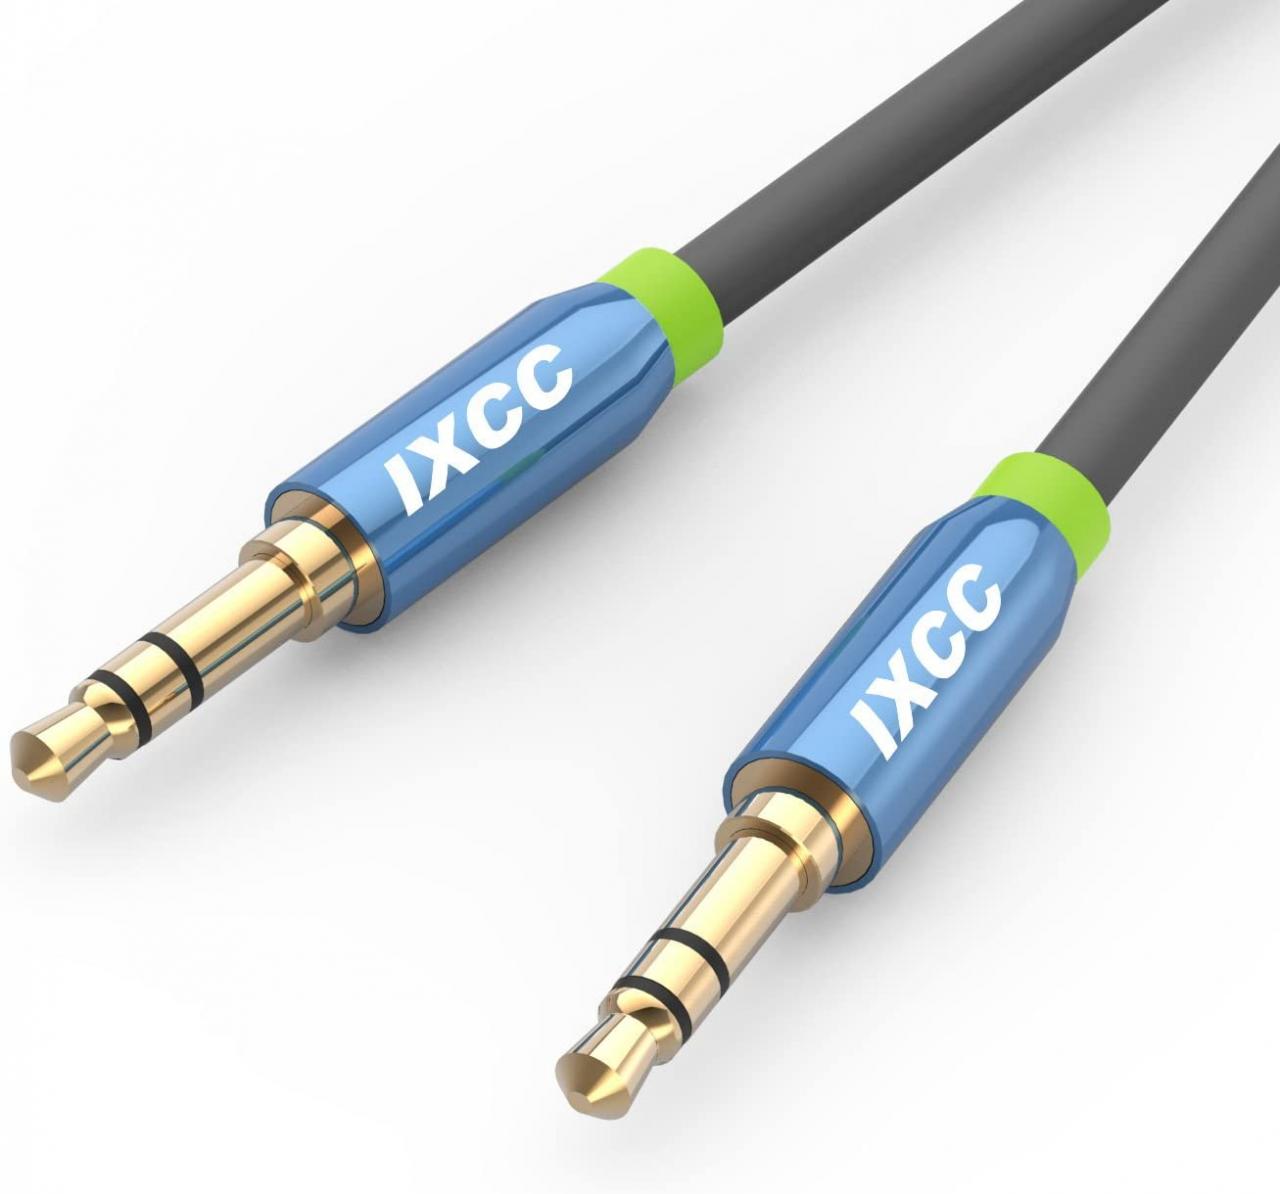 Buy iXCC 3-Ft Tangle-Free Male to Male 3.5mm Auxiliary Cable with Gold  Plated Connectors for Apple, Android Smartphones, Tablet and MP3 Players -  Standard Packaging Online in Taiwan. B00KWR8Q9S